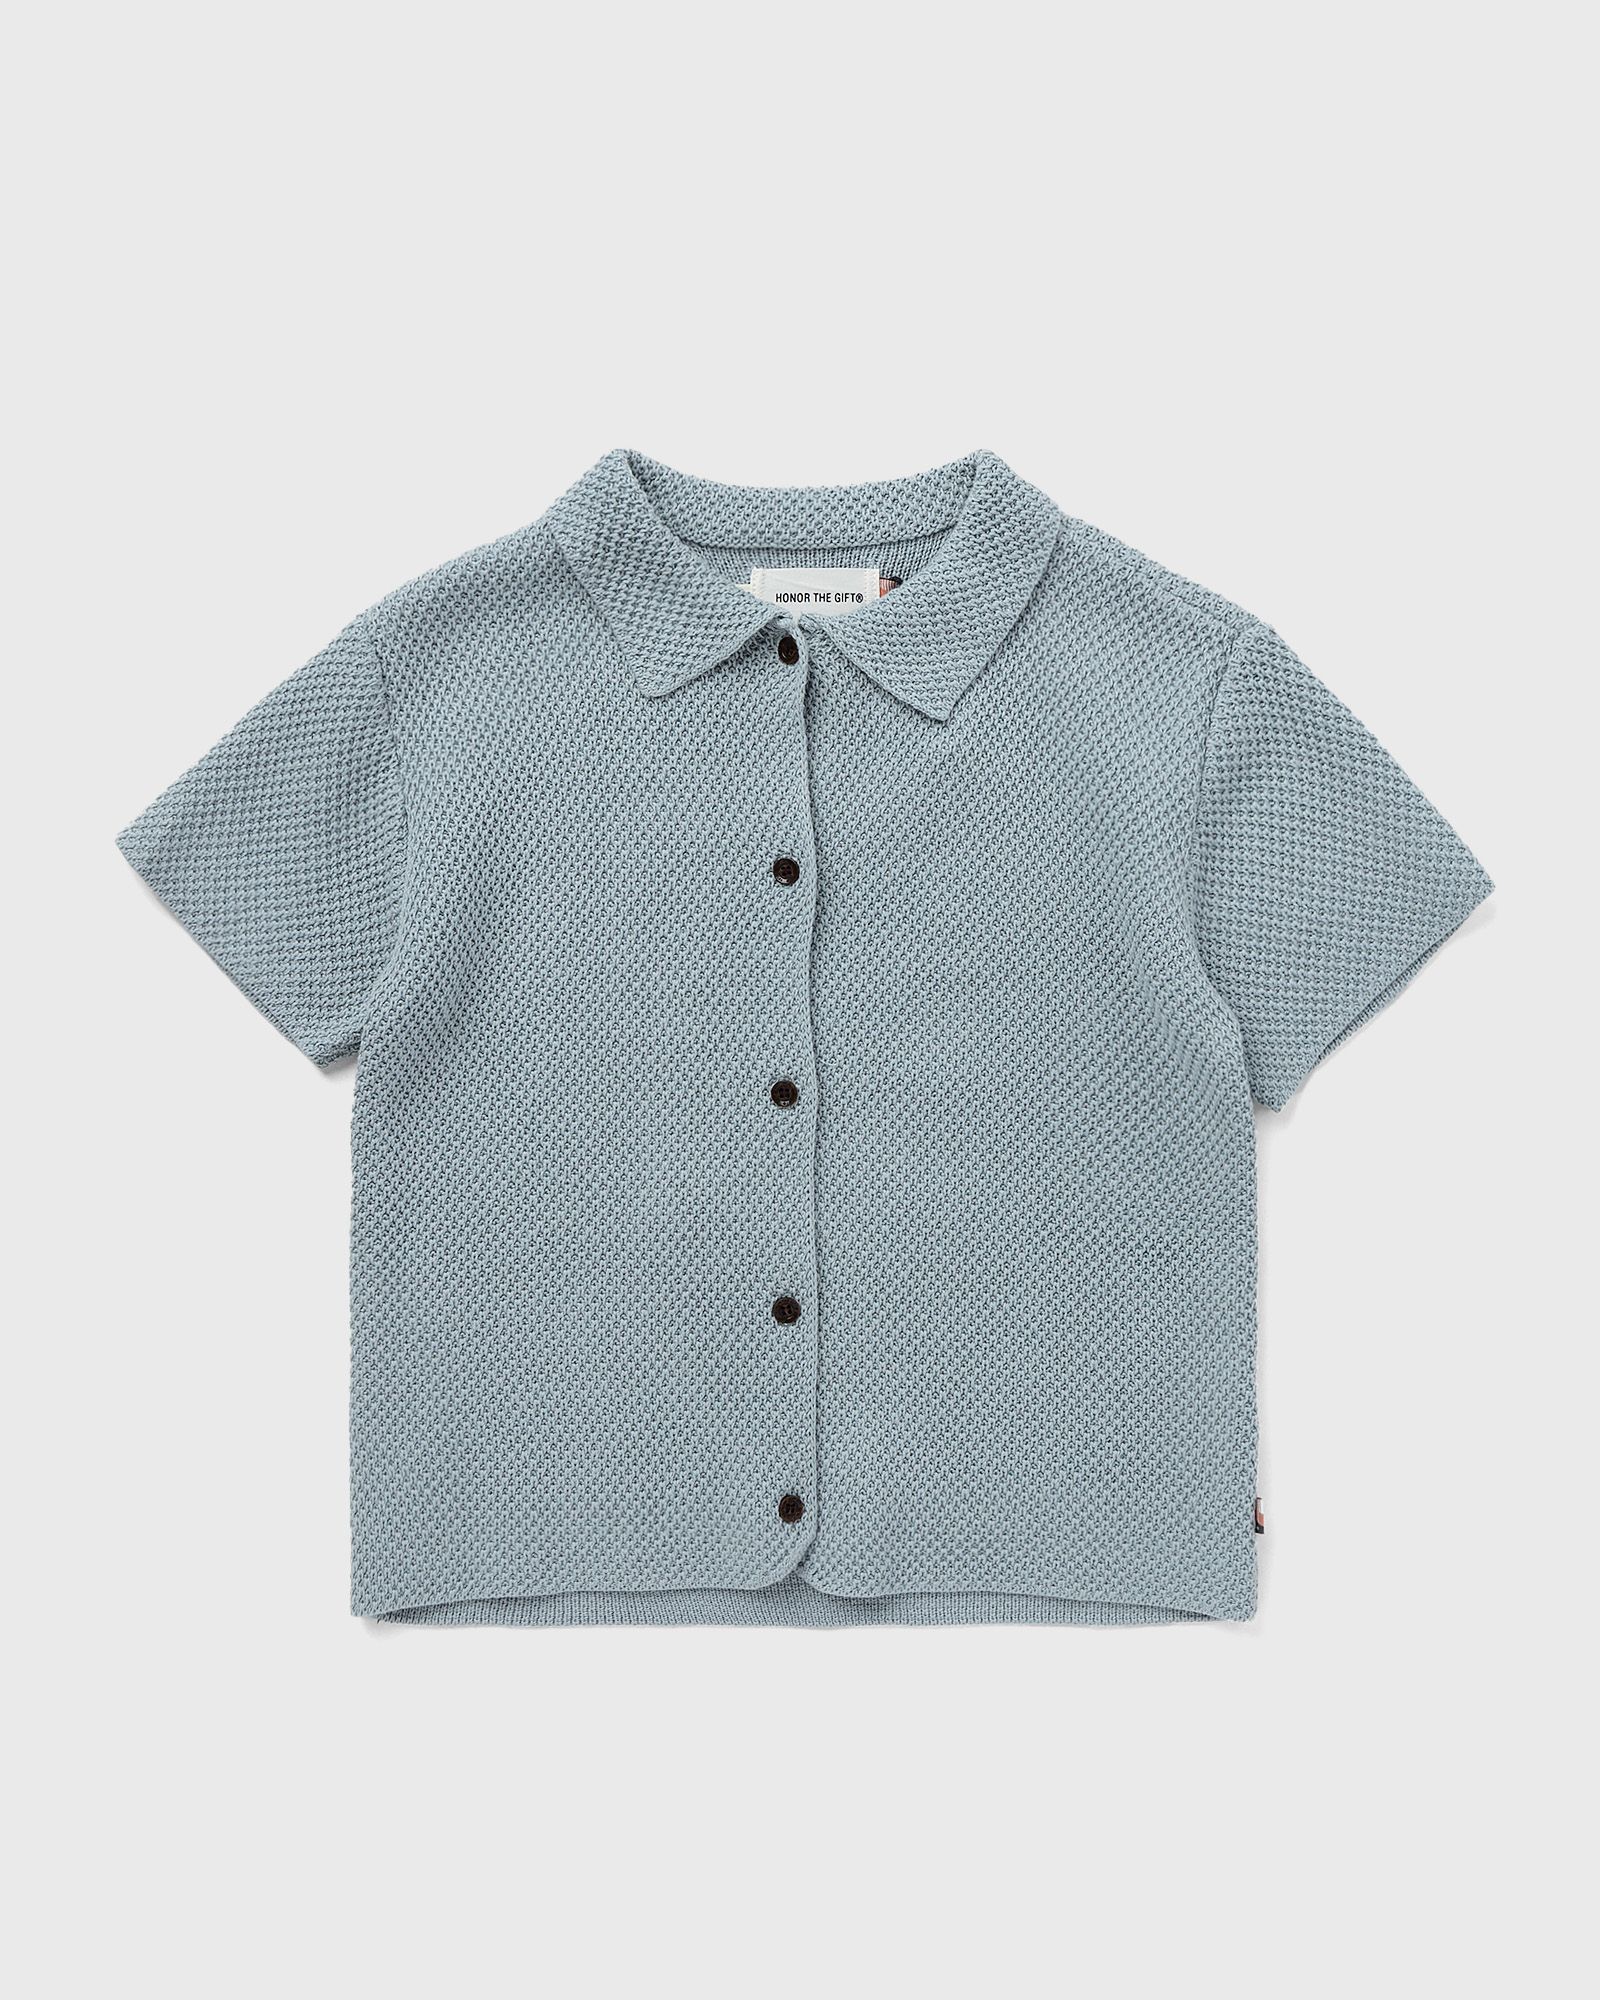 Honor The Gift - knit h button up  shirts blue in größe:age 2-4 | eu 92-104